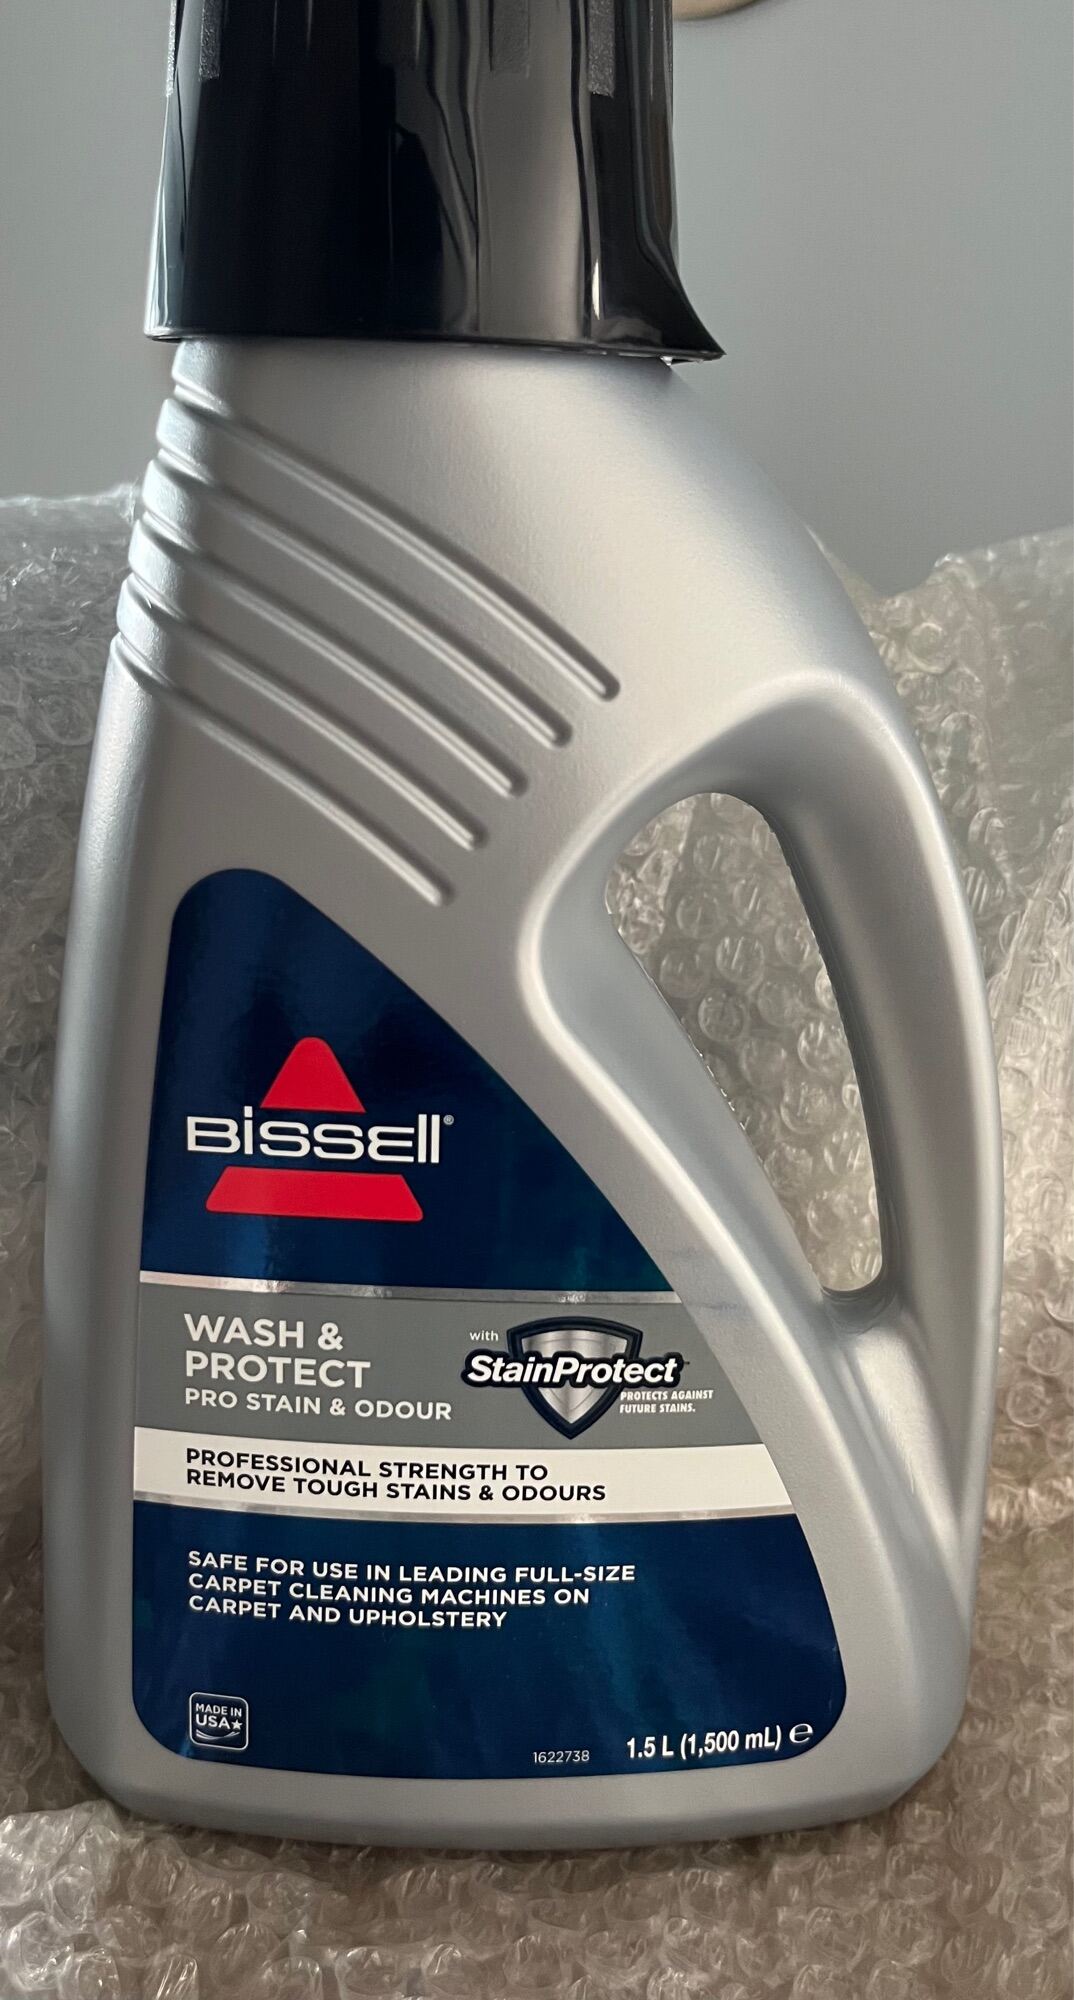 Buy Bissell Wash & Protect Pet 1.5L Carpet Cleaning Solution